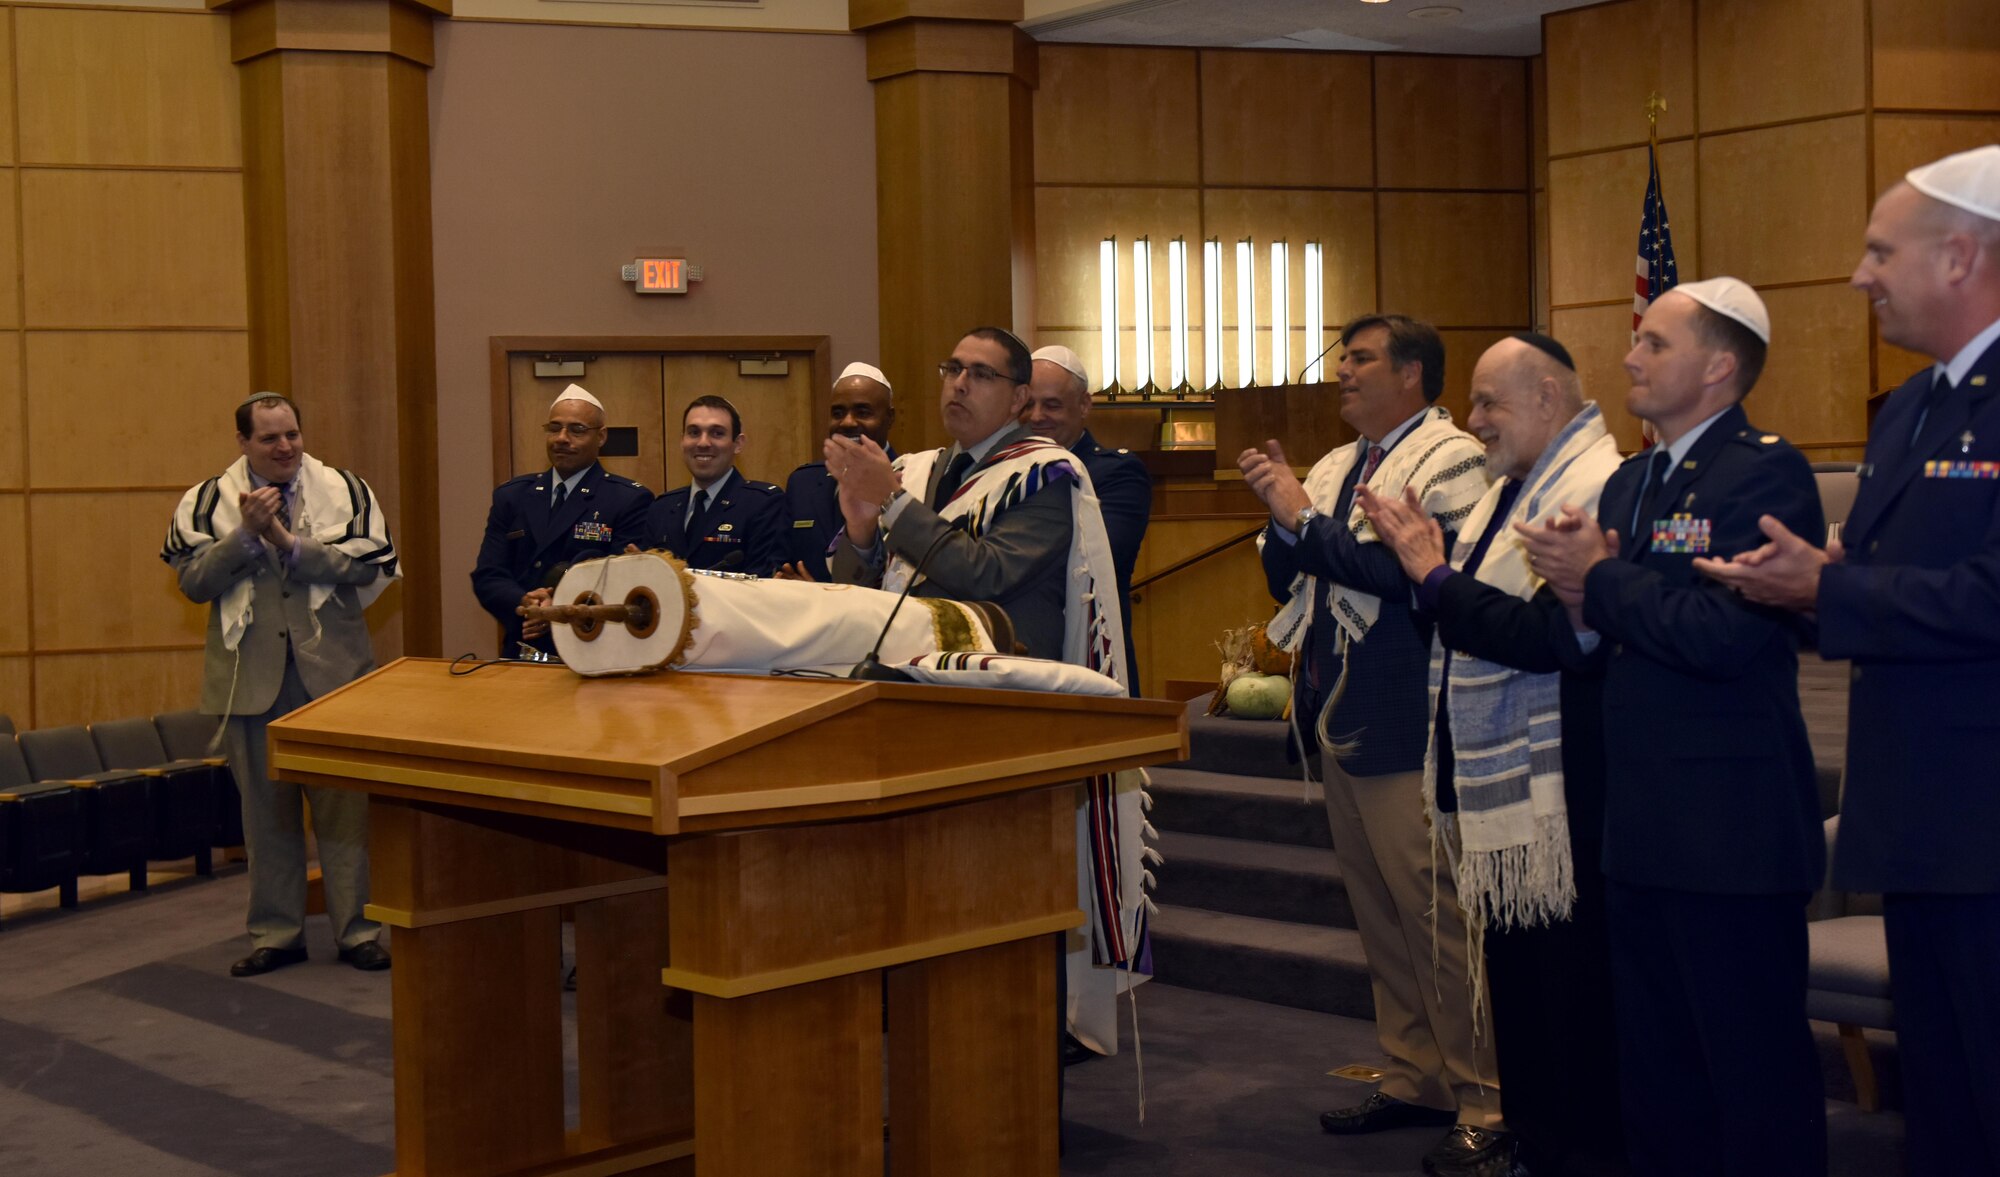 Memebers of the Chaplain Corps assigned to Whiteman Air Force Base, Mo., were honored with borrowing a Torah from the Congregation B’Nai Amoona in St. Louis, Mo., Oct. 10, 2017.